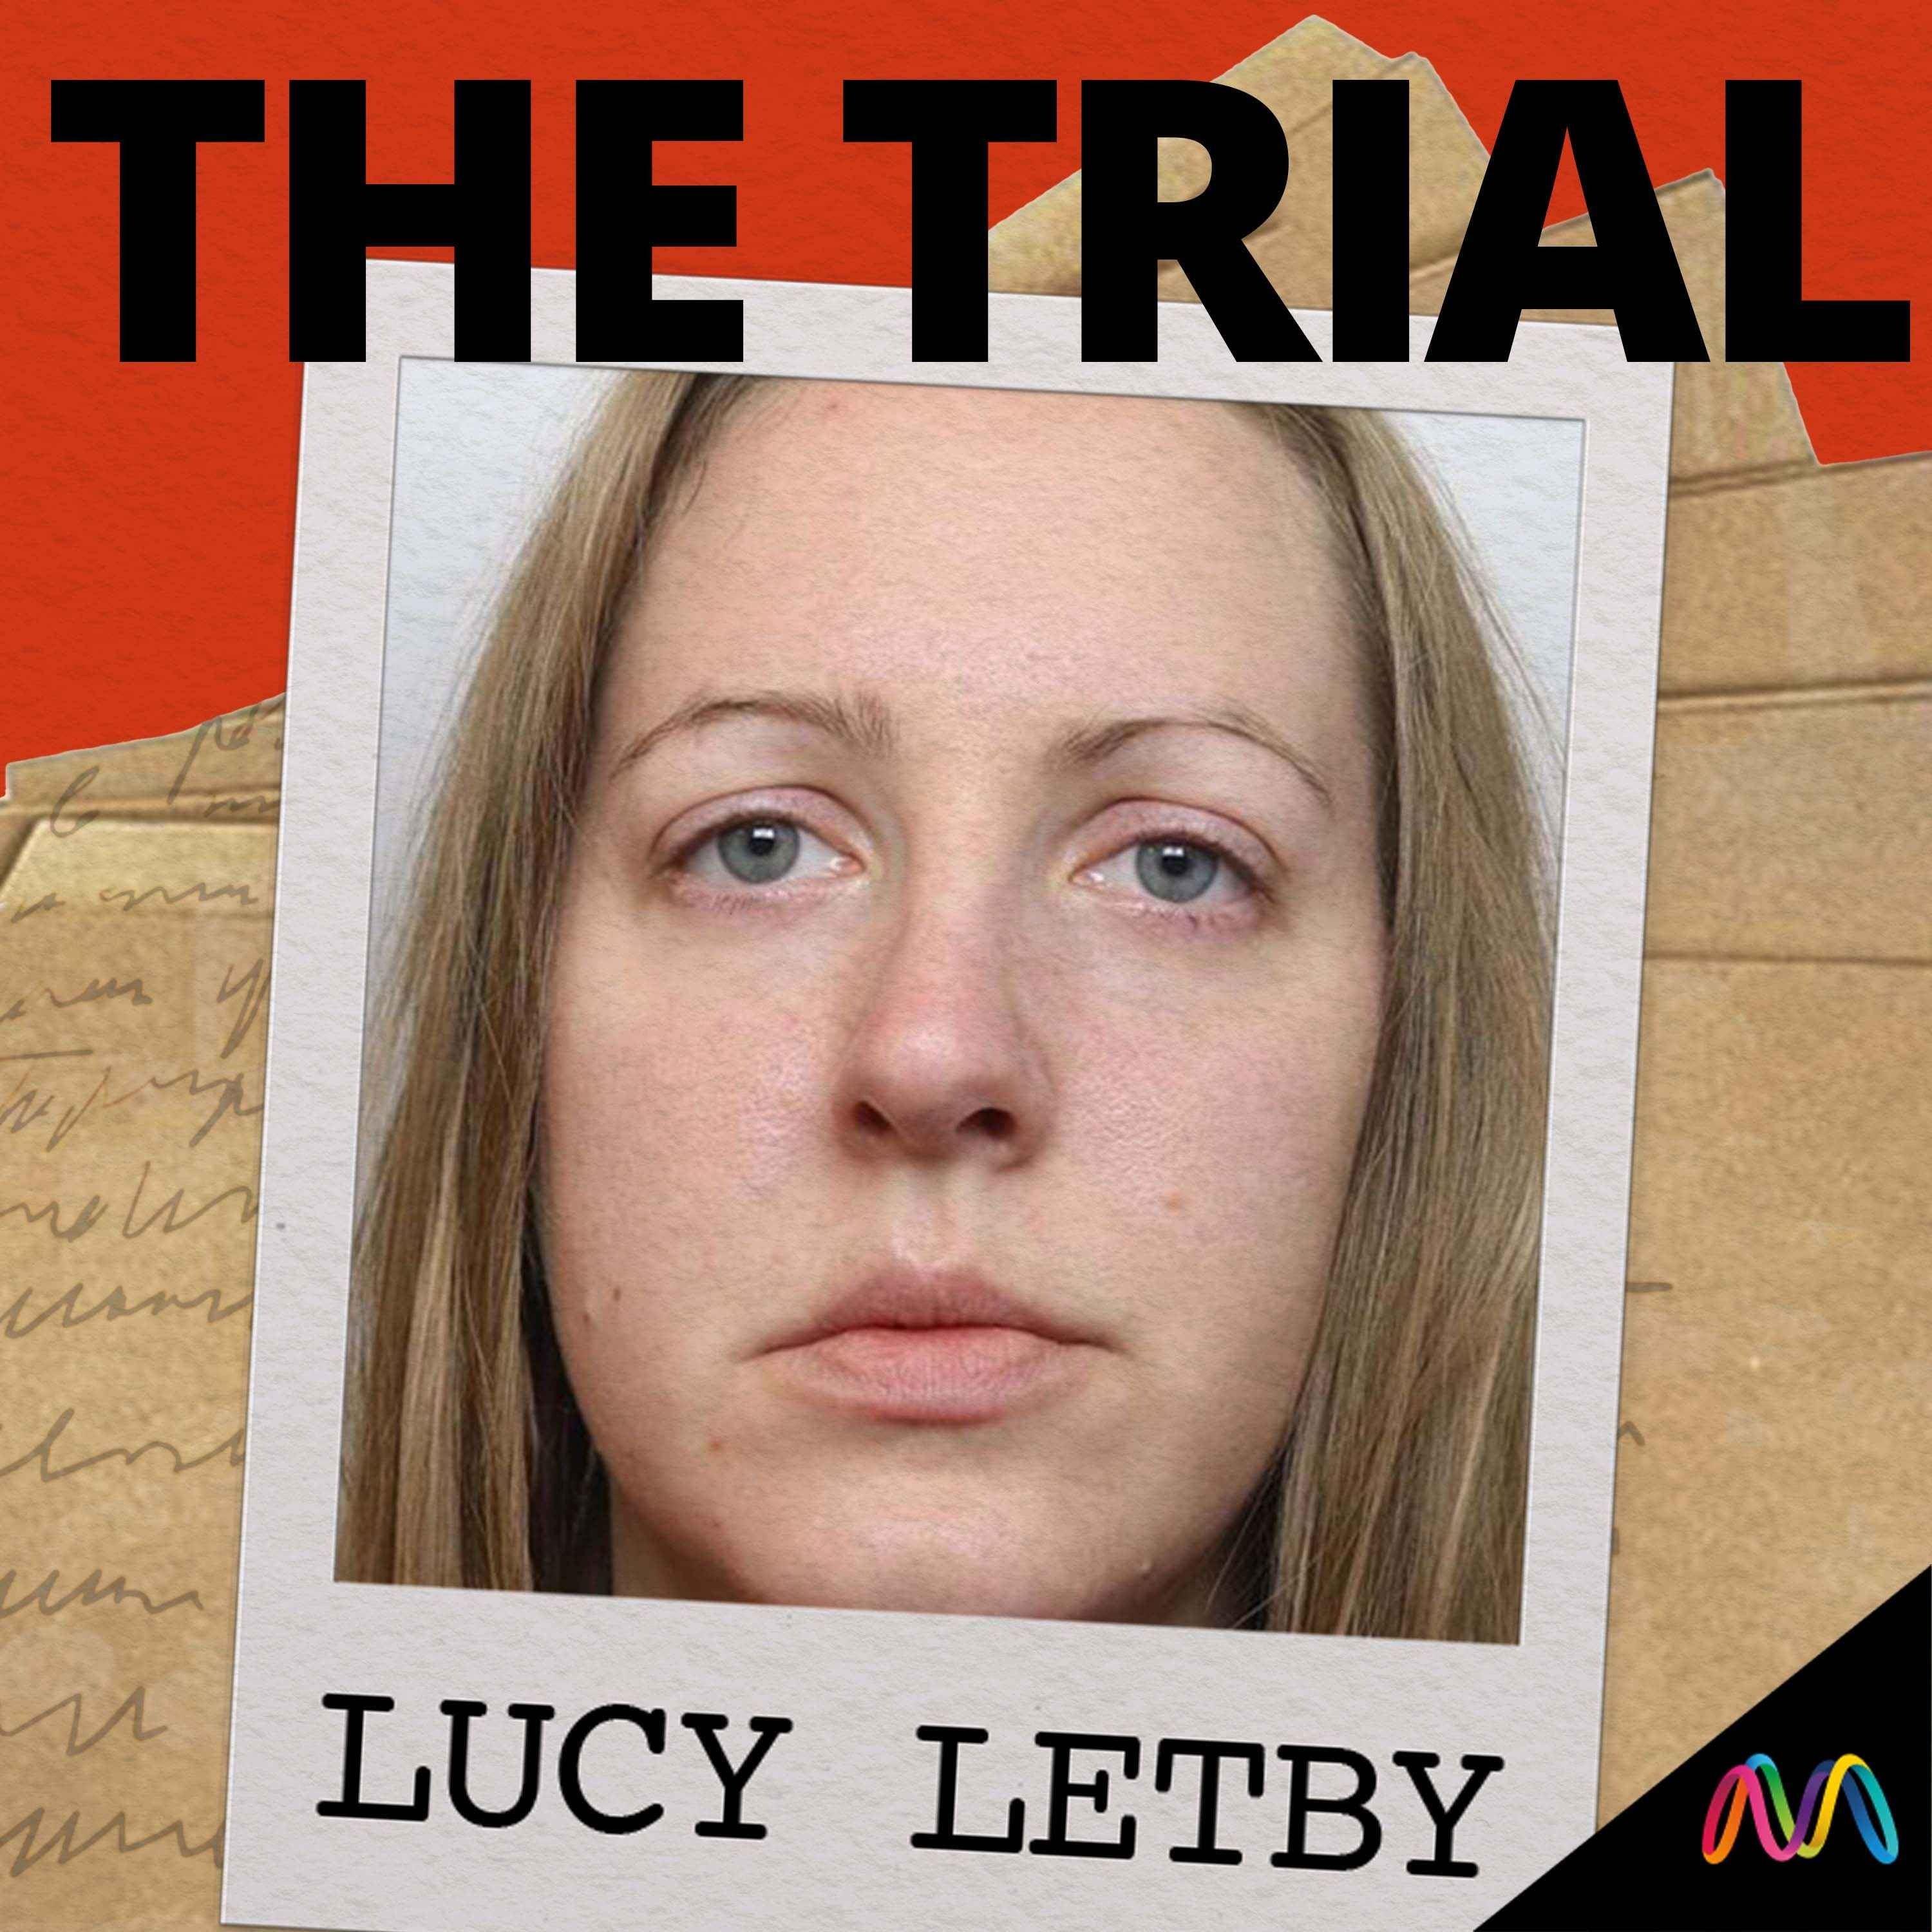 Lucy Letby: ’The presumption of guilt’